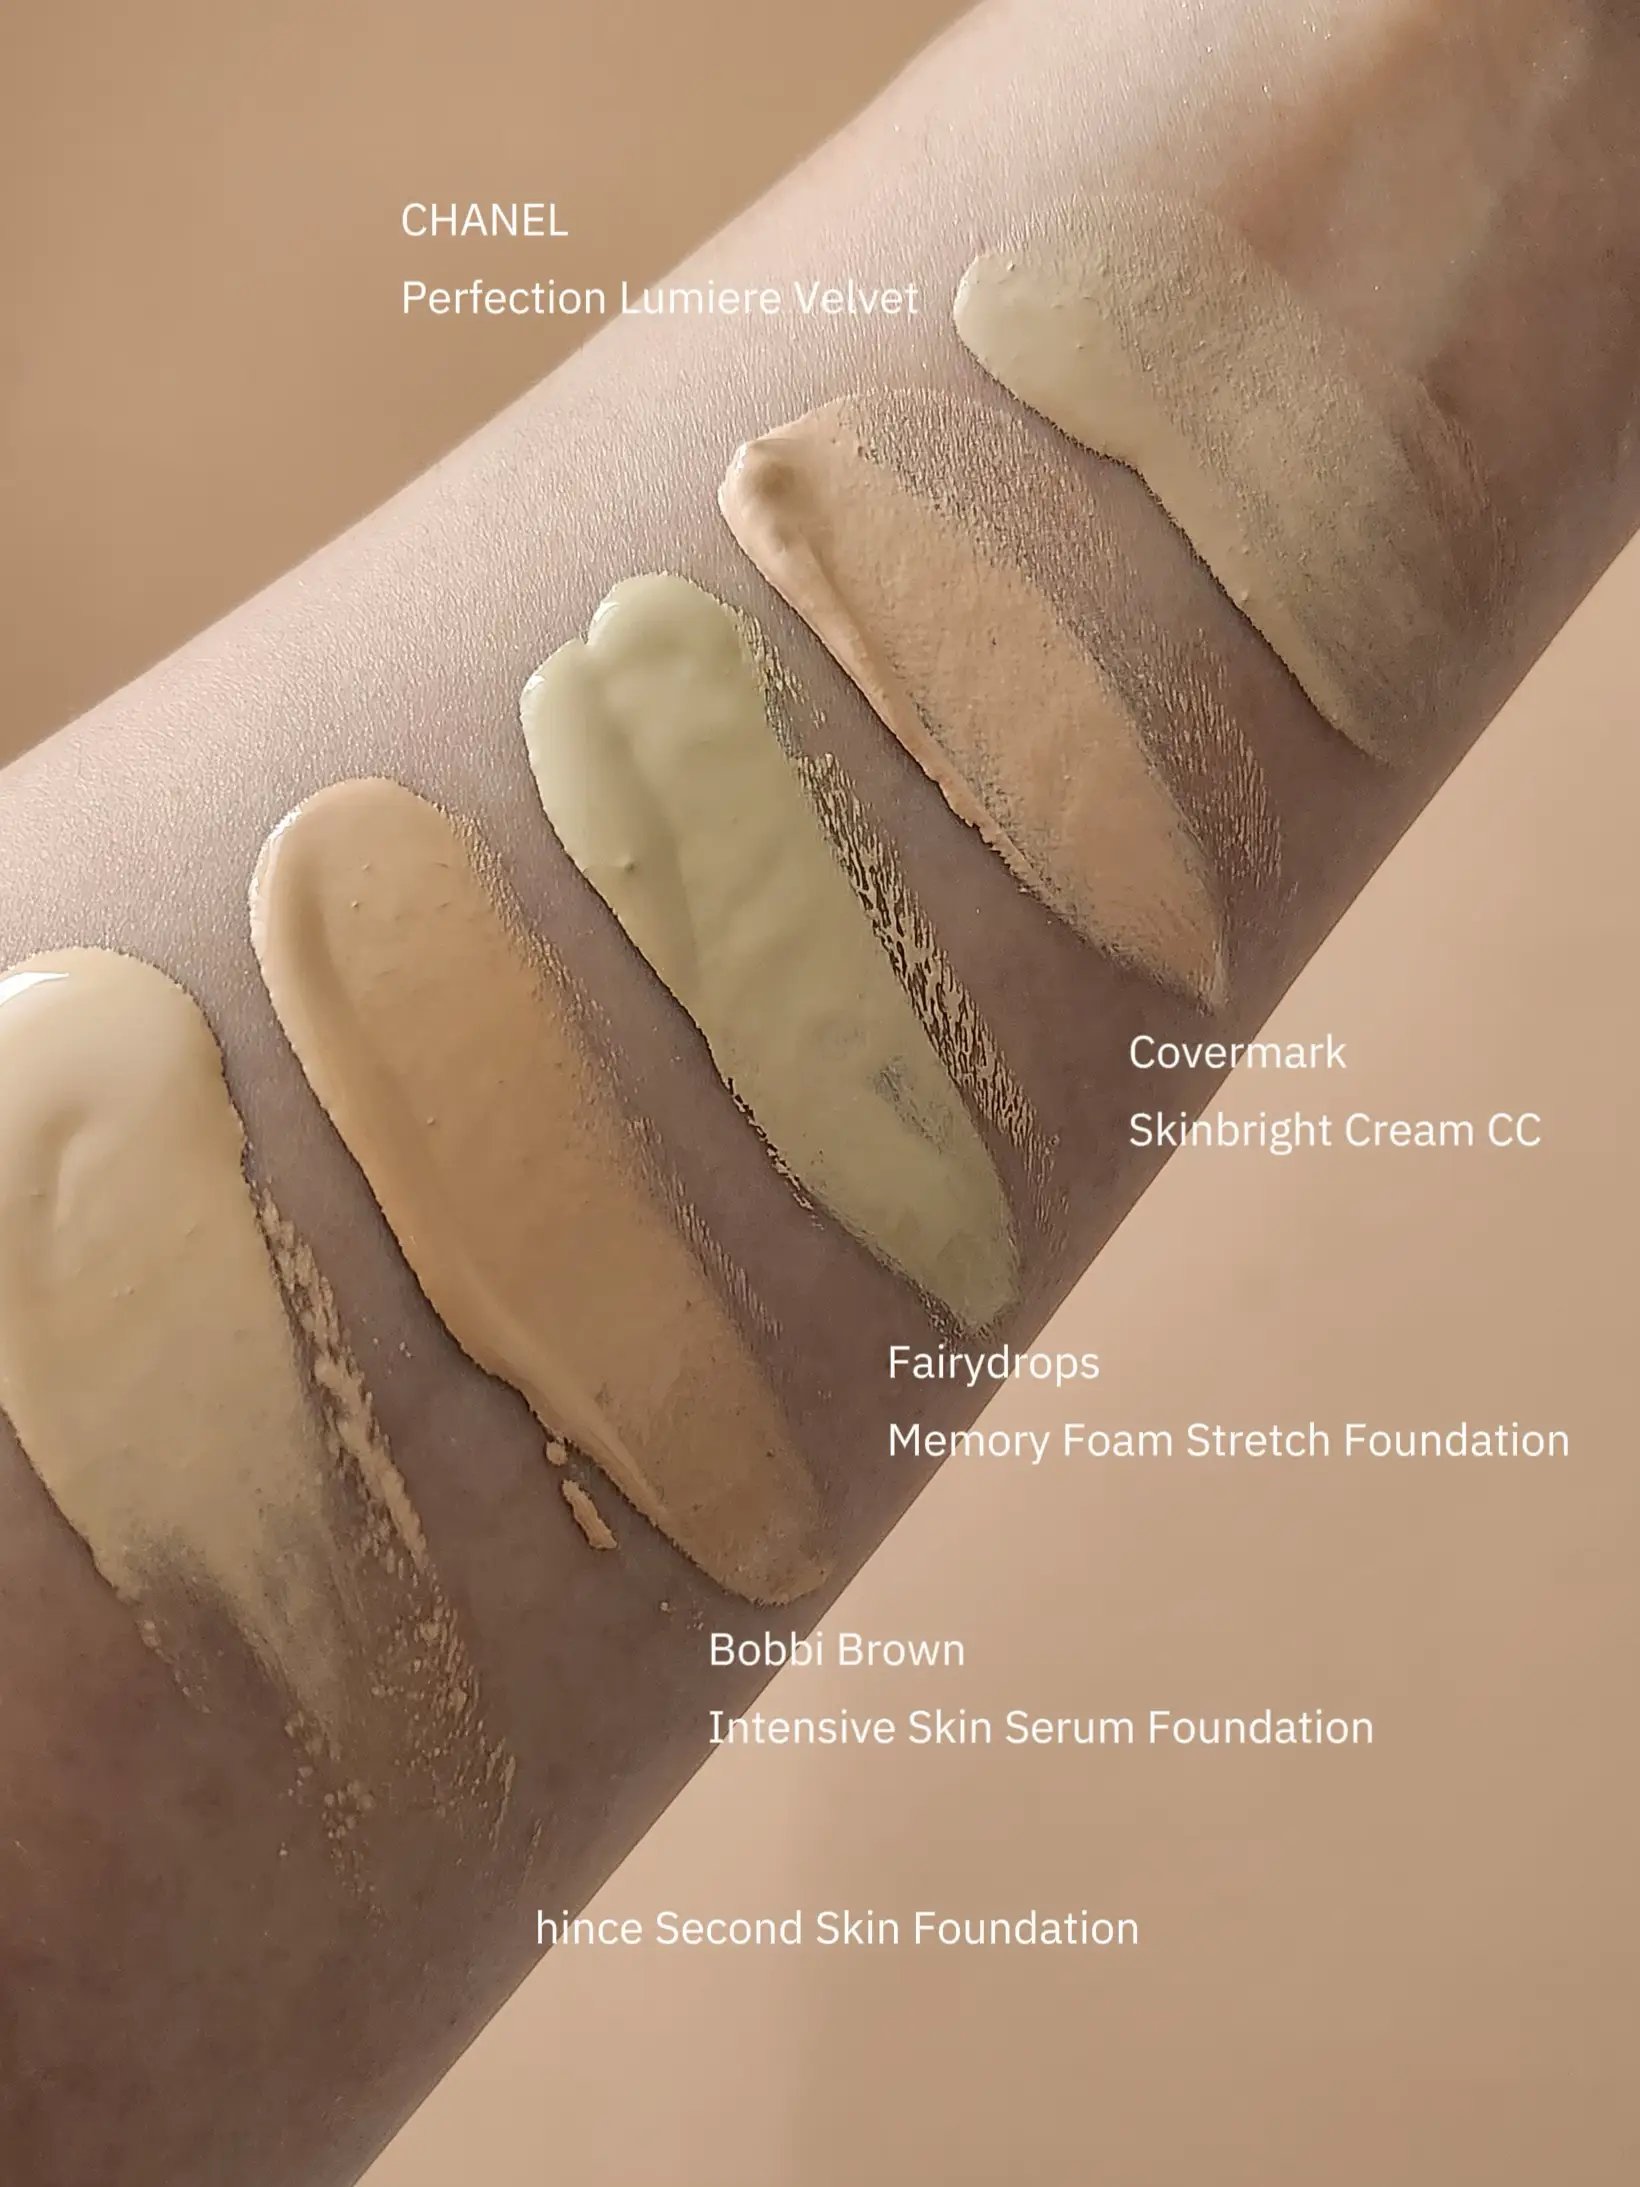 Chanel Perfection Lumiere Velvet Foundation - Review, Ingredients